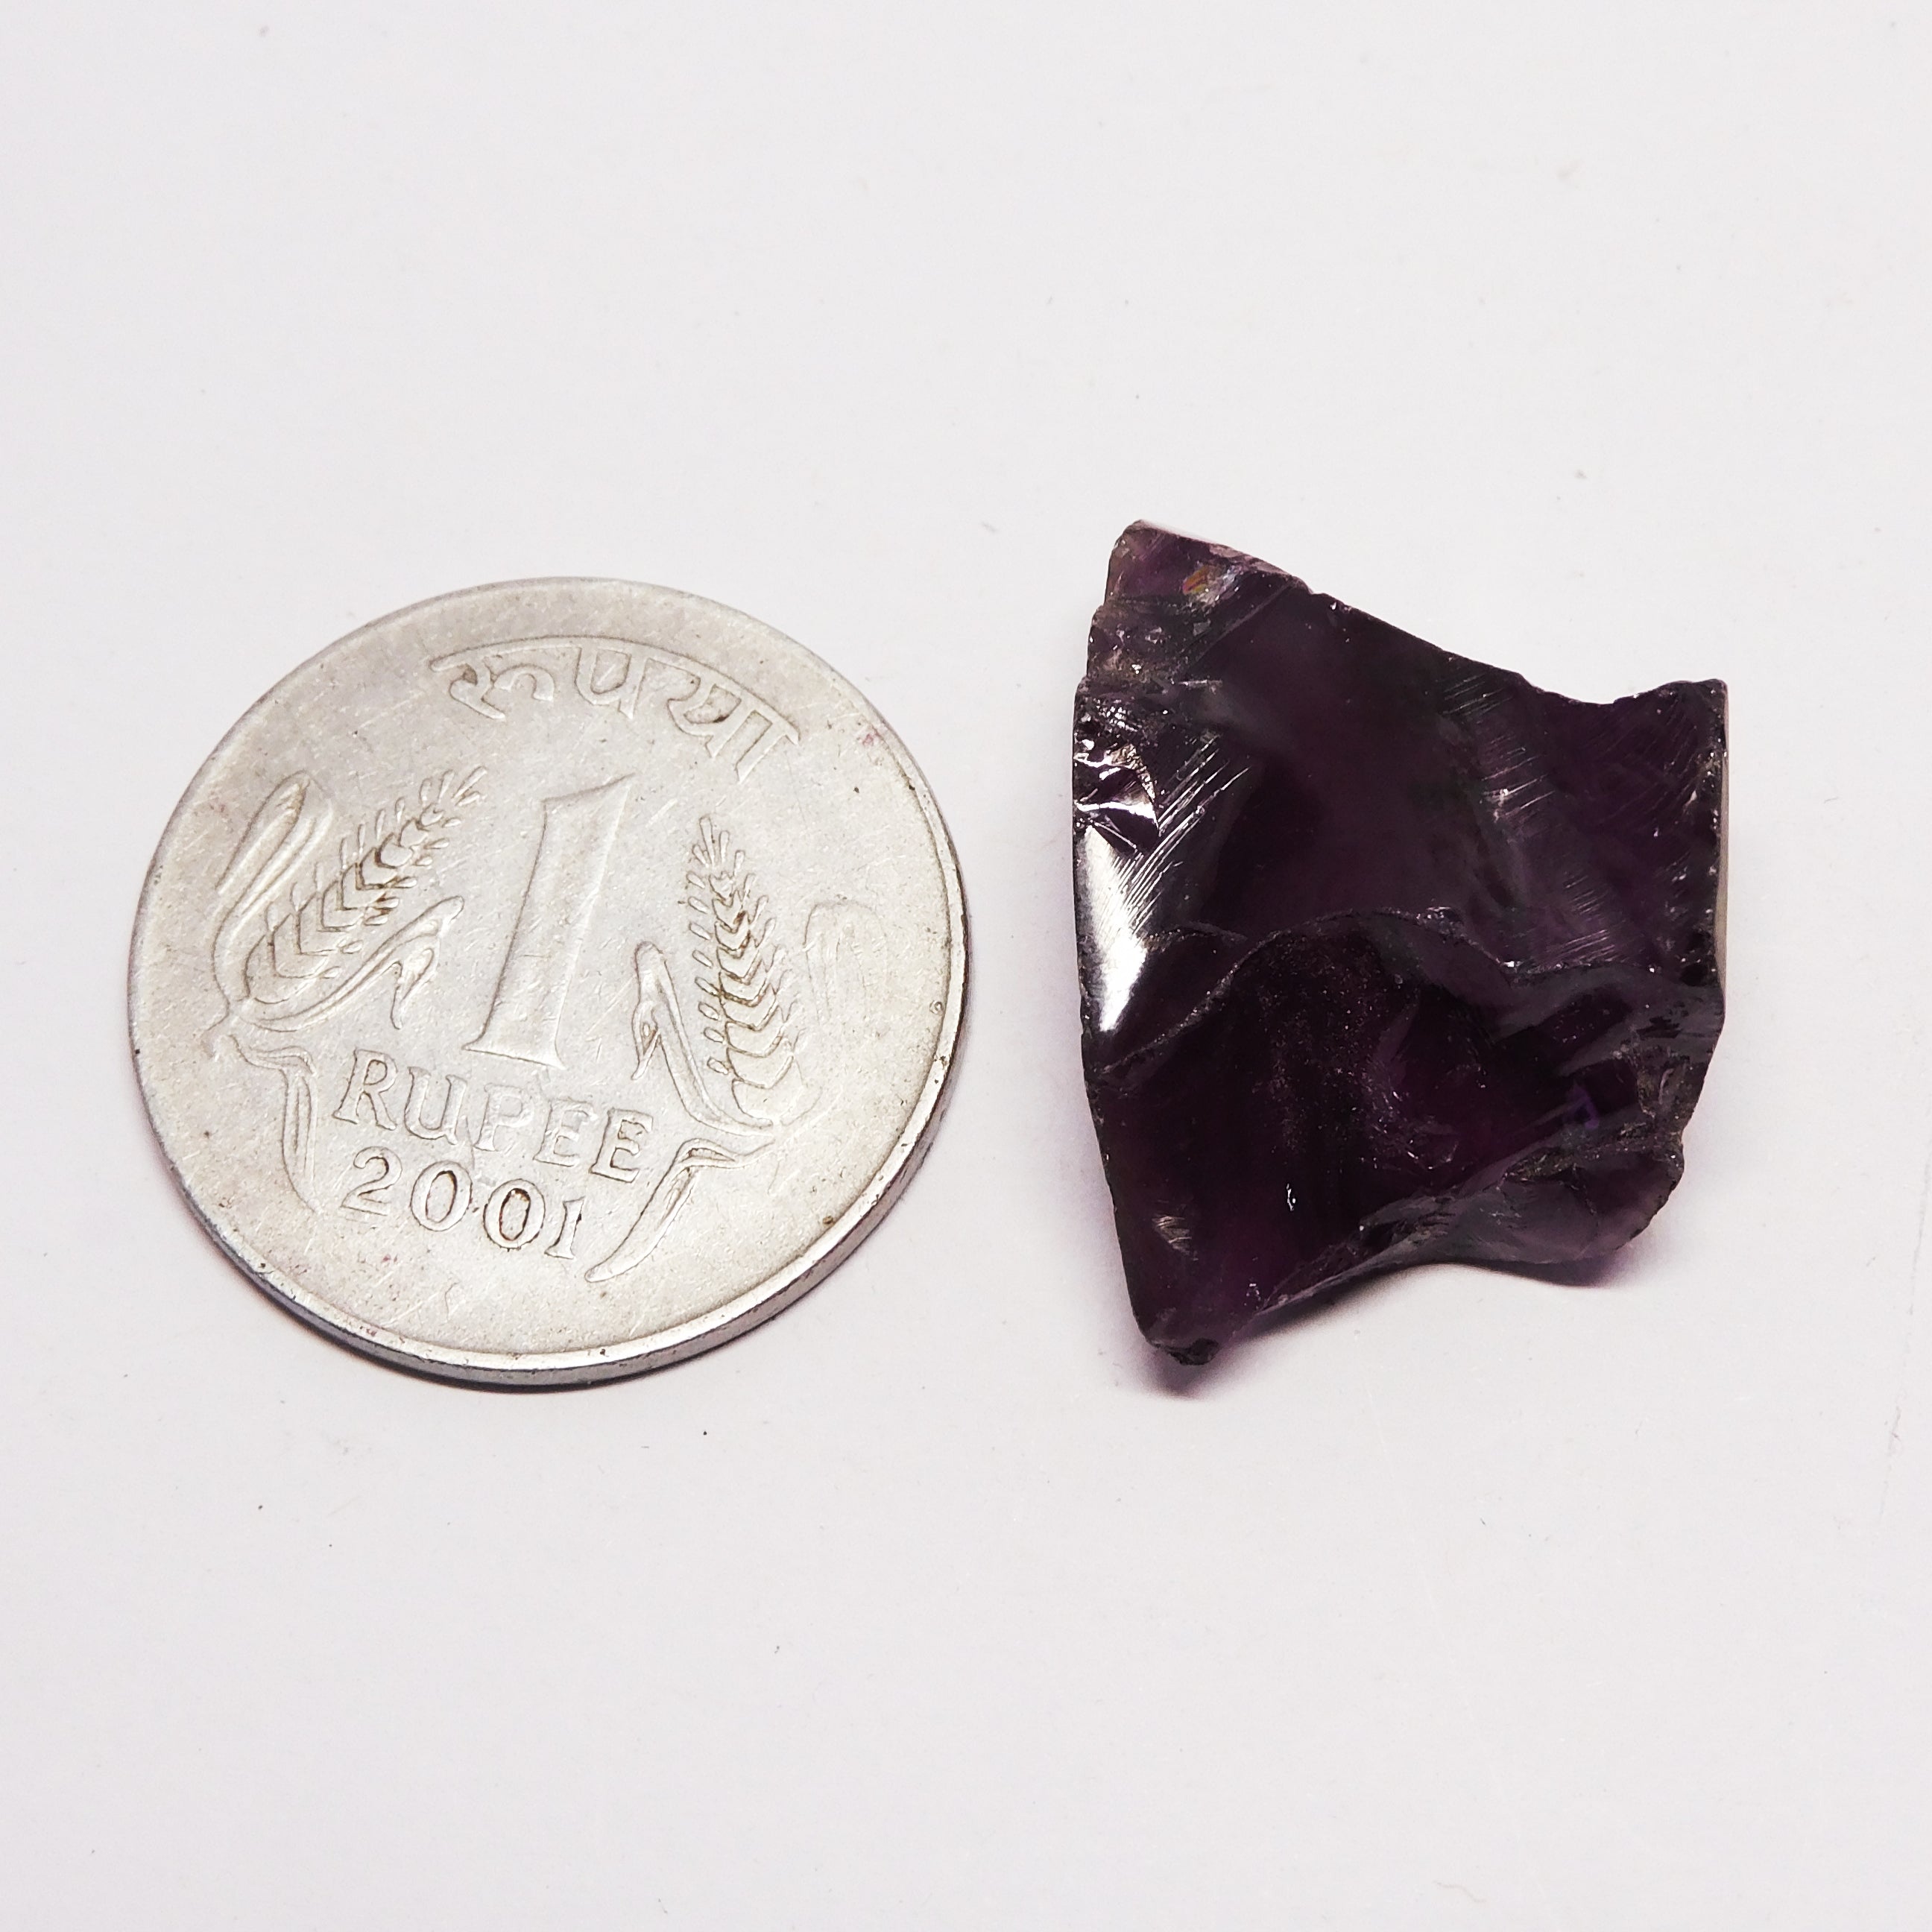 Gift For Her/ Him | ON SALE | Uncut Raw CERTIFIED 40.85 Carat Natural Loose Gemstone Huge Size Rough Color Change Alexandrite